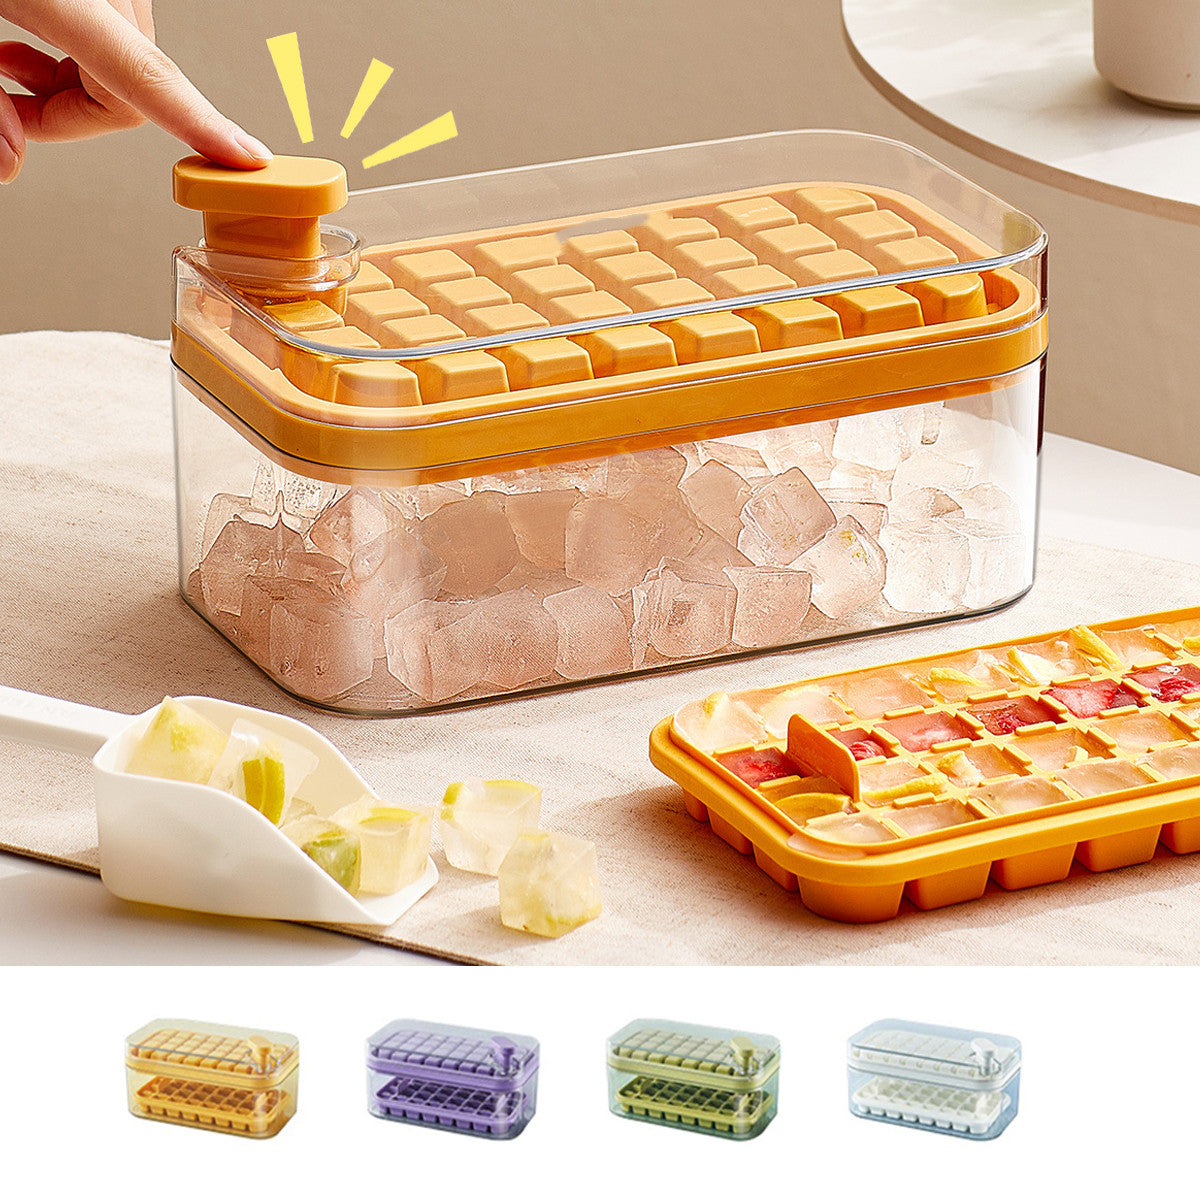 One-Button Press Type Ice Mold Box - Ice Cube Maker with Storage Box and Lid